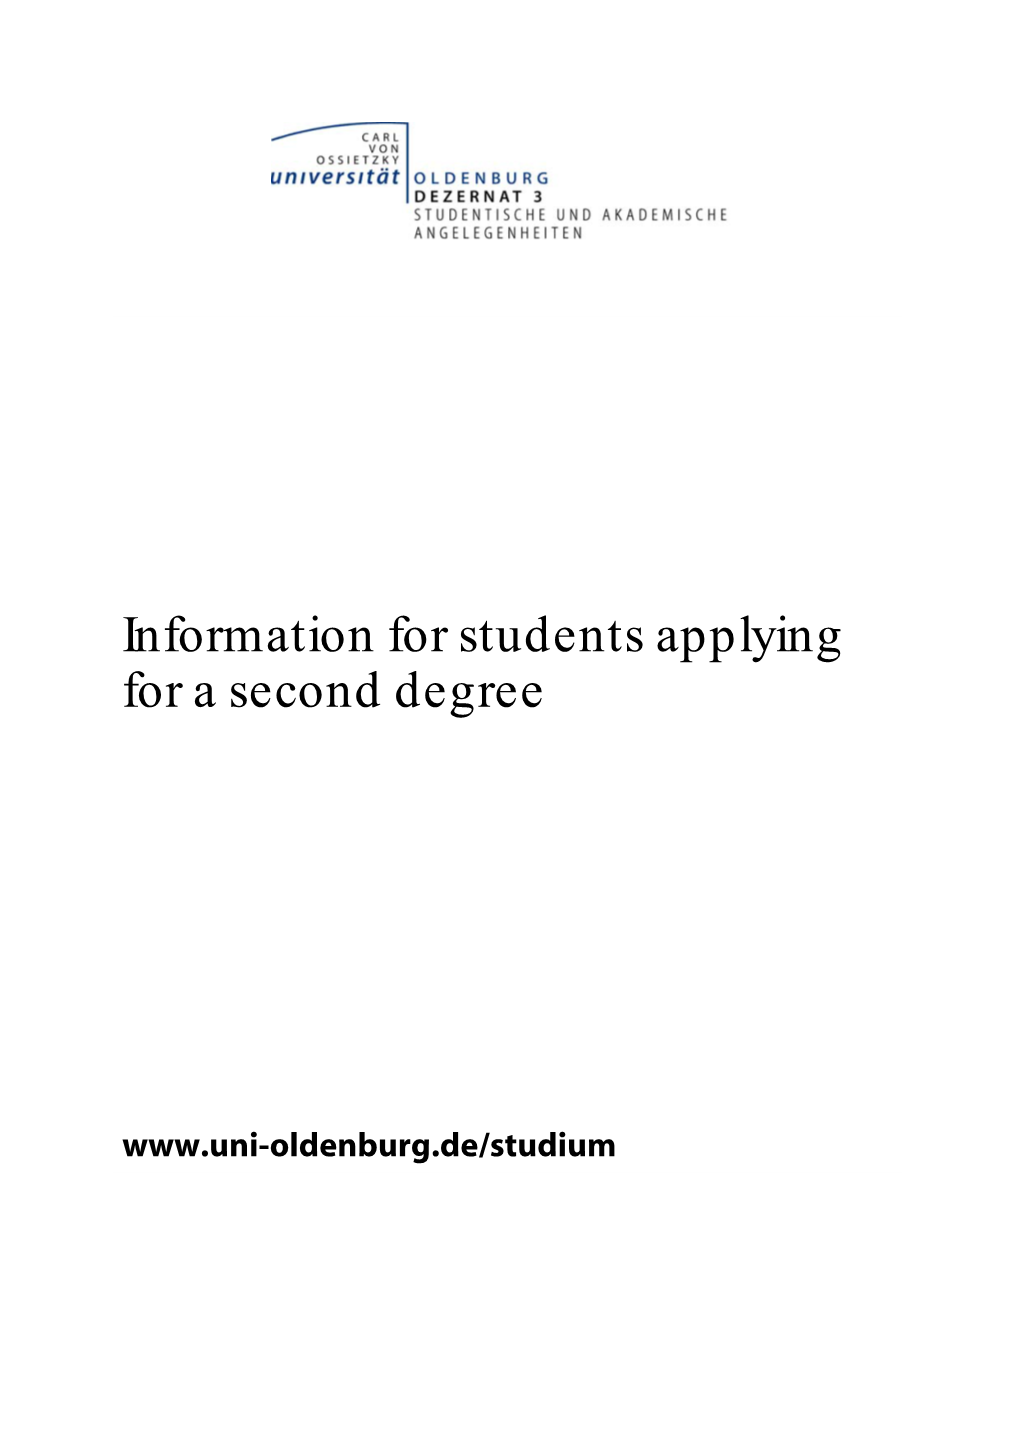 Information for Students Applying for a Second Degree